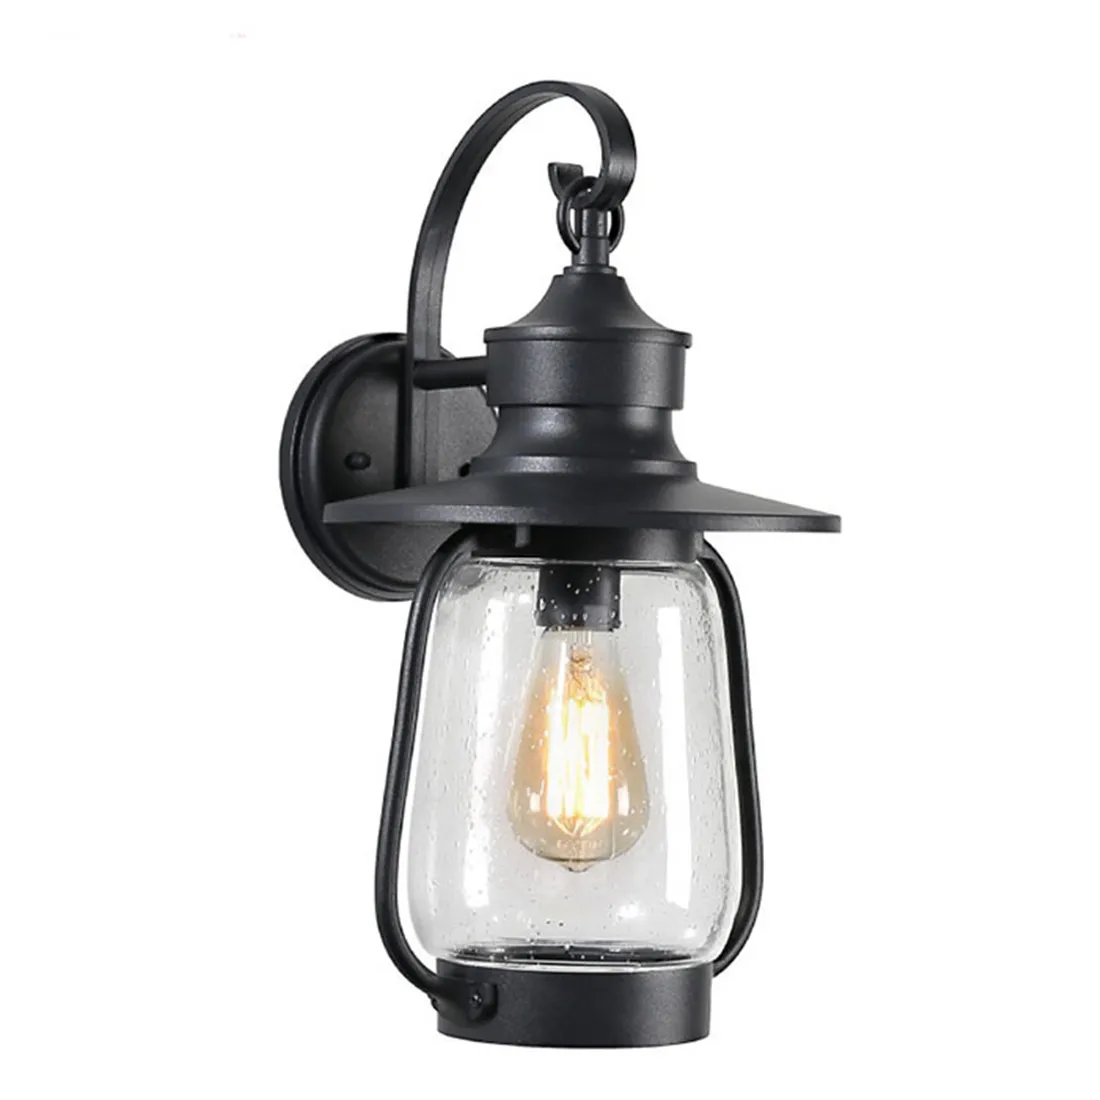 Outdoor Bubble Glass Shade Barn Lights Black Exterior Wall Lantern Outside Wall Mount Scocne Porch Lamp for House Front Door бумажник barn